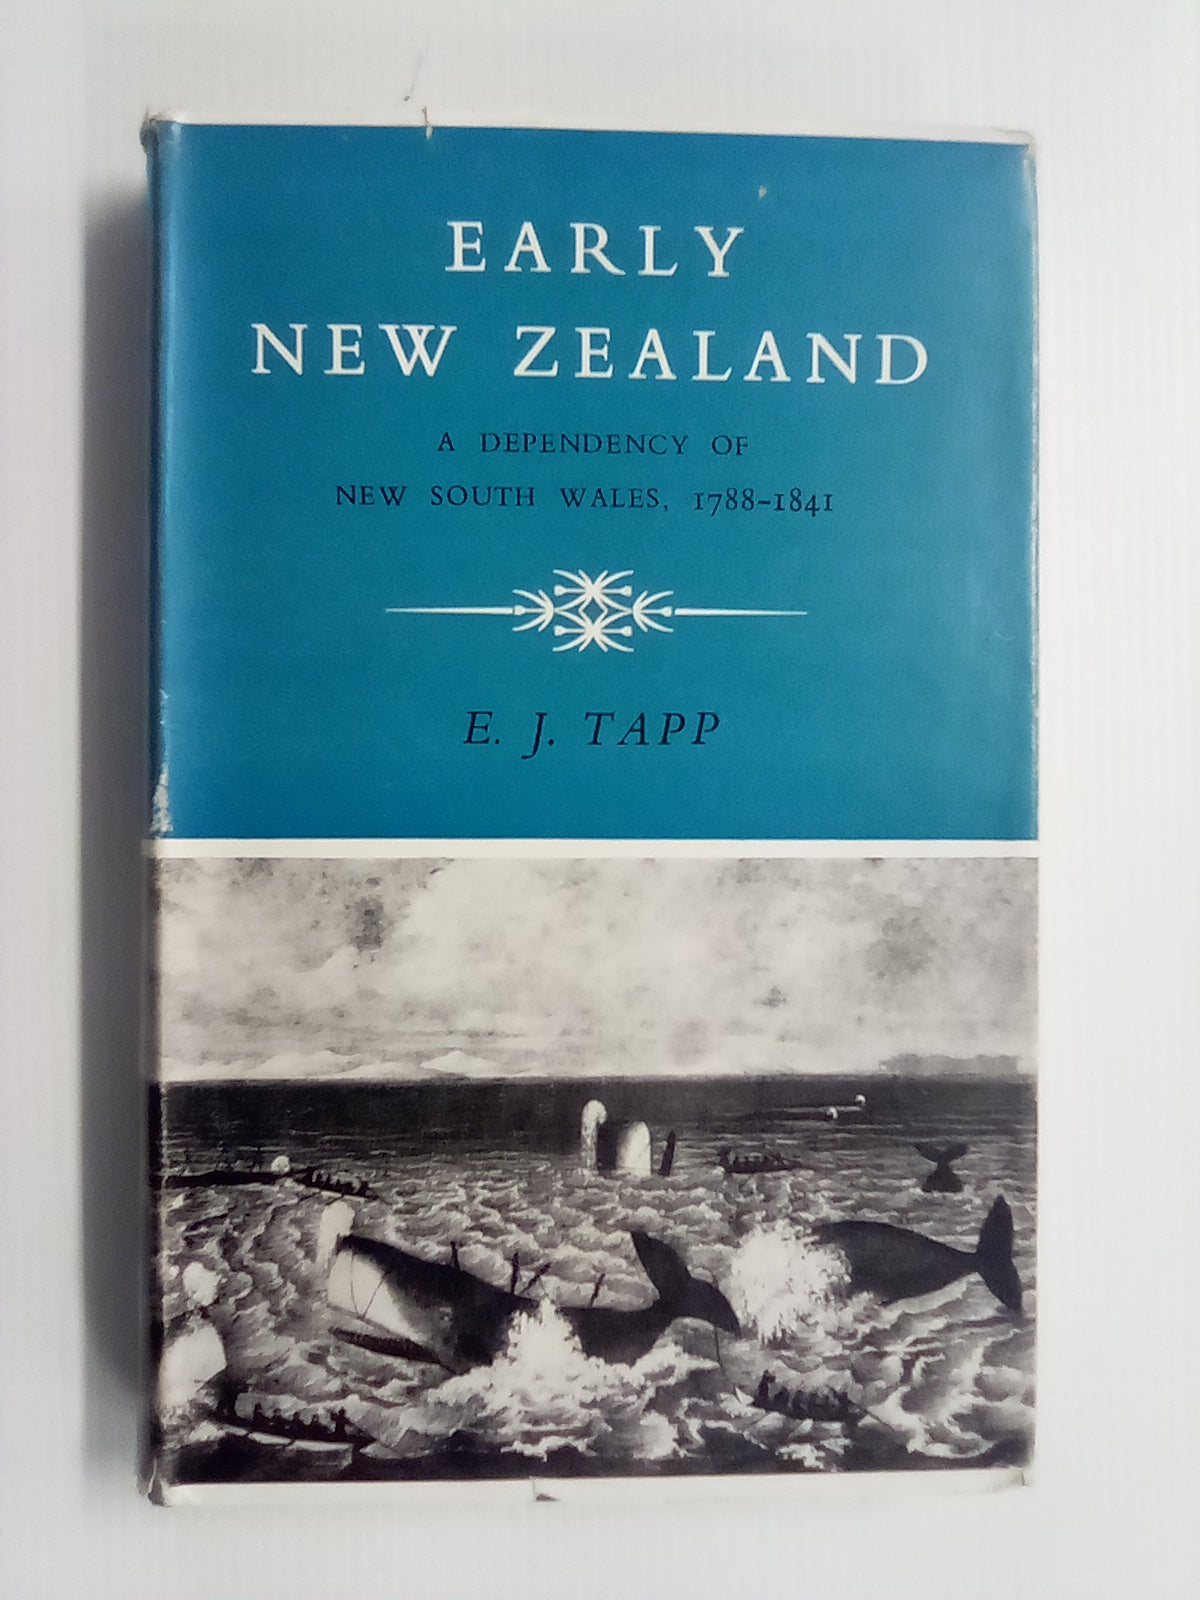 Early New Zealand - A Dependency of New South Wales 1788-1841 by E.J. Tapp